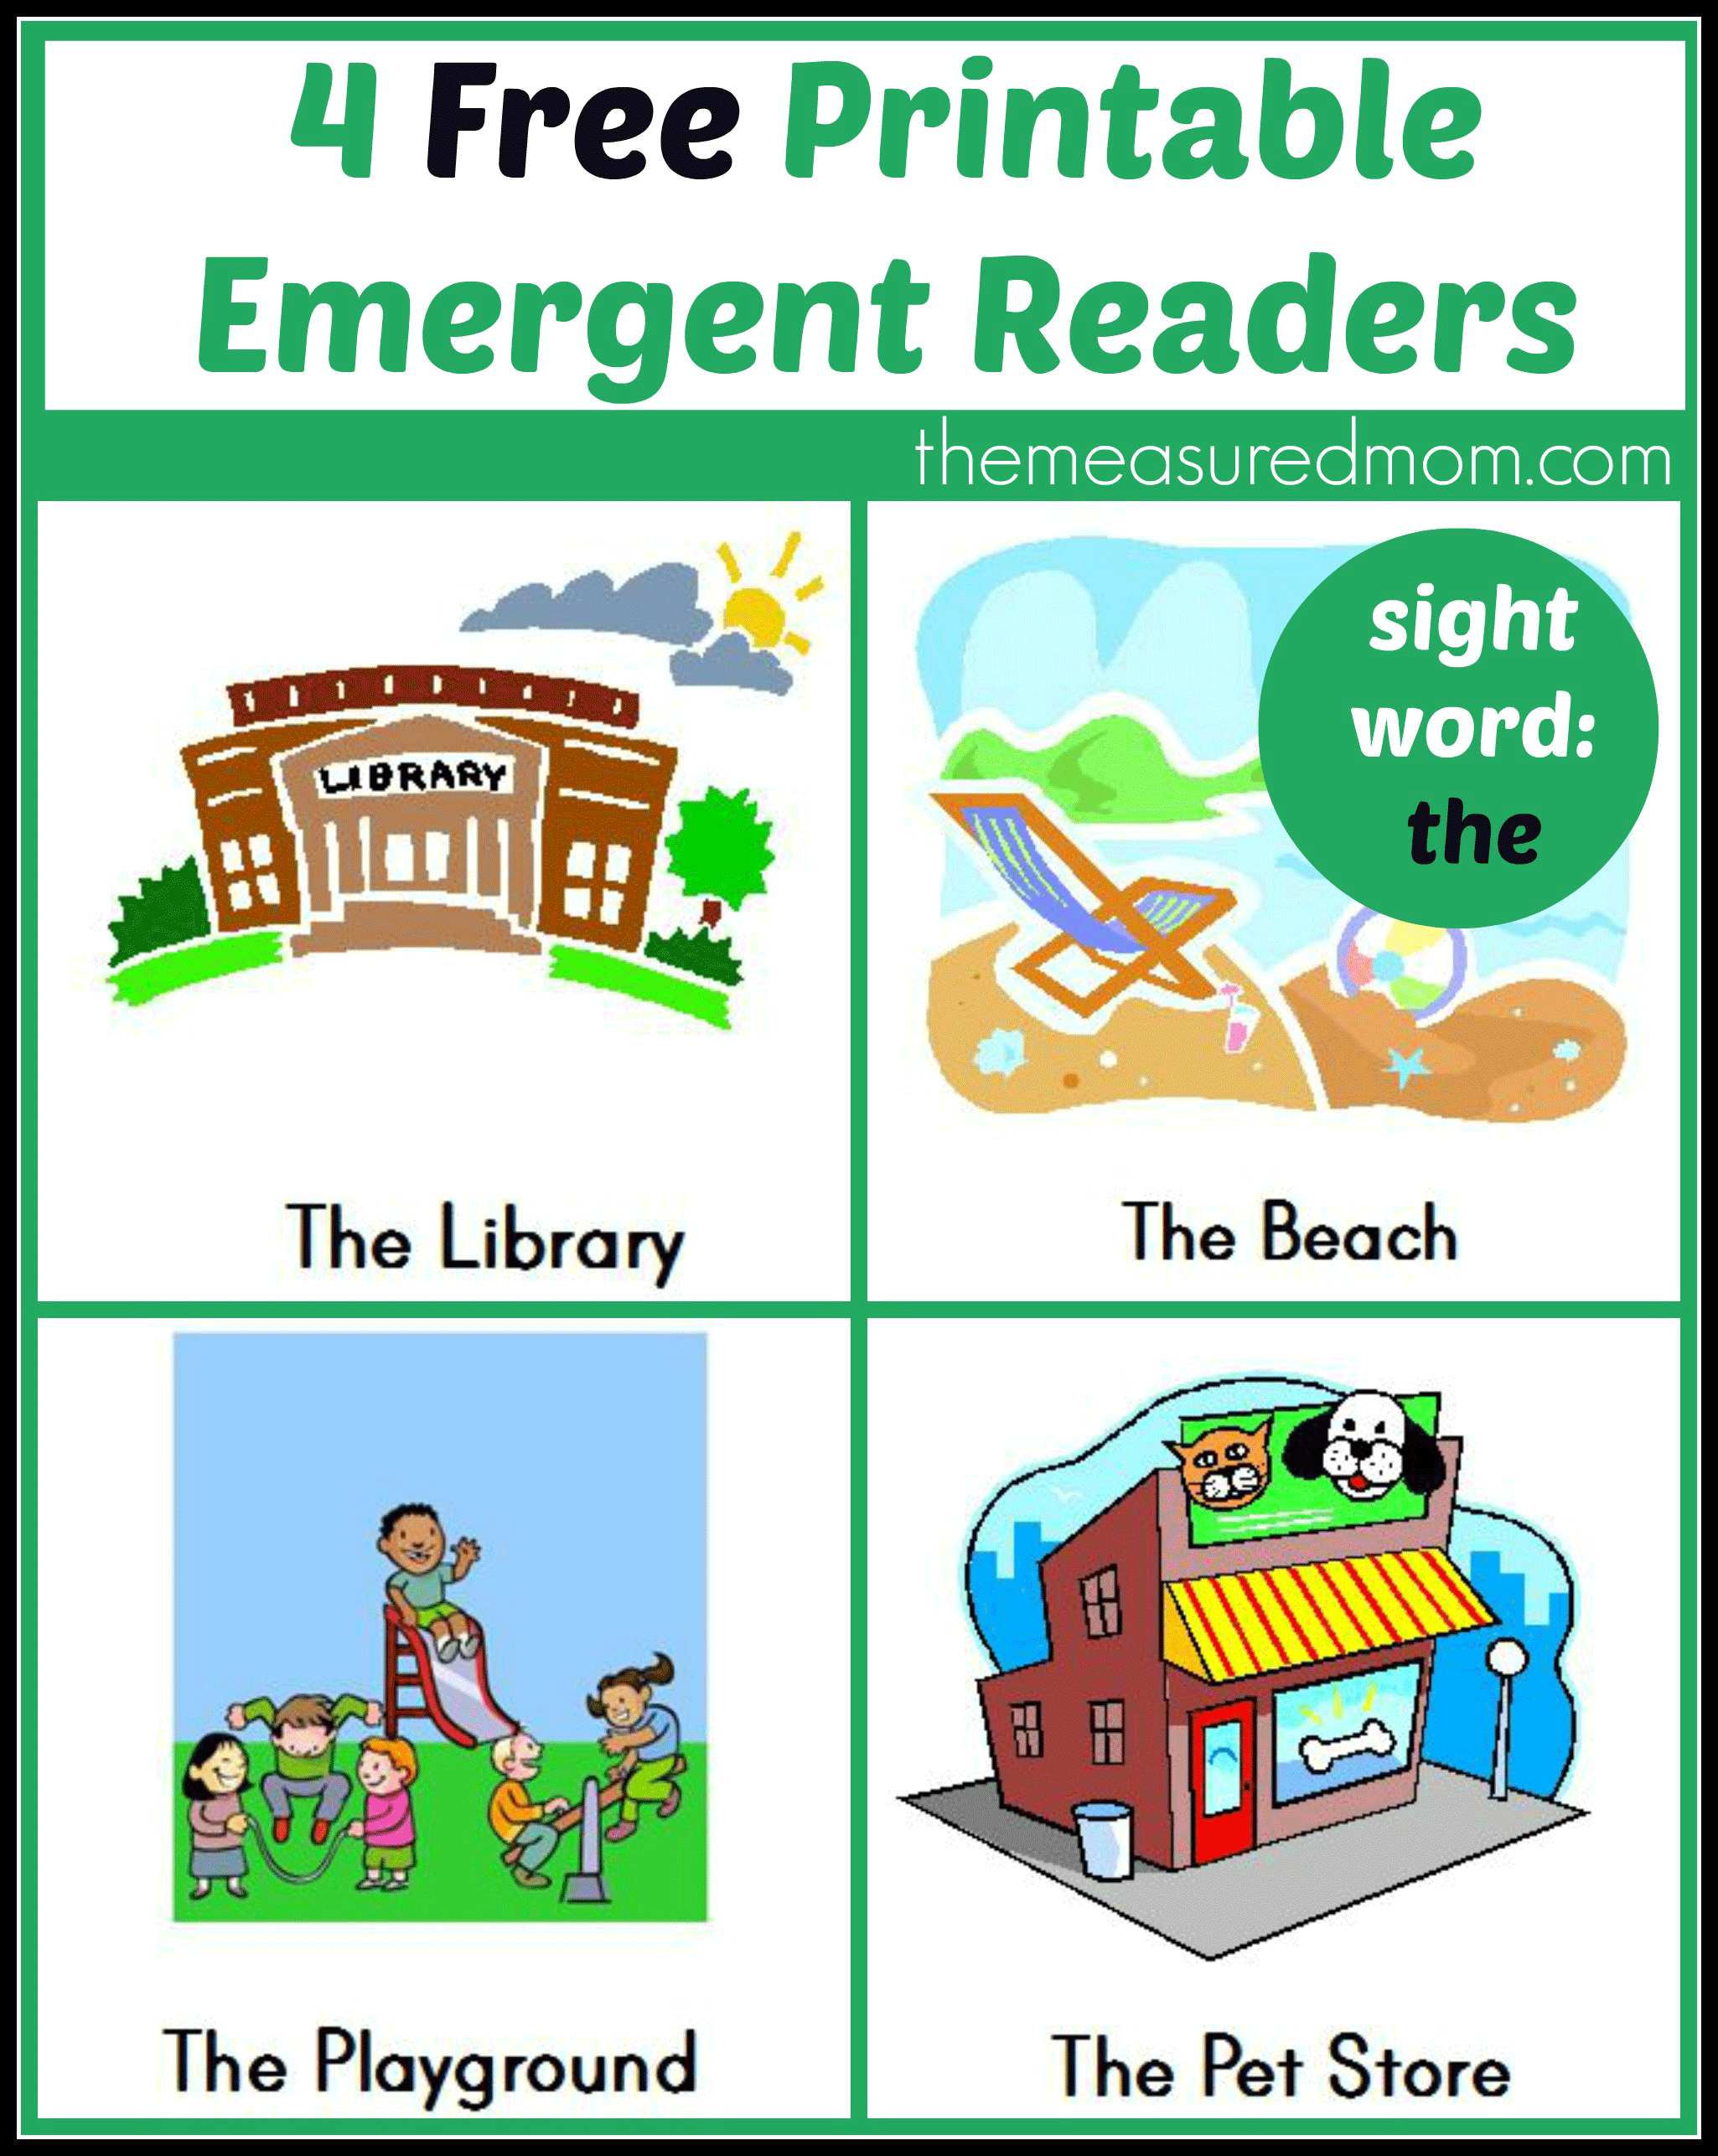 Free Printable Emergent Readers sight word "the" The Measured Mom